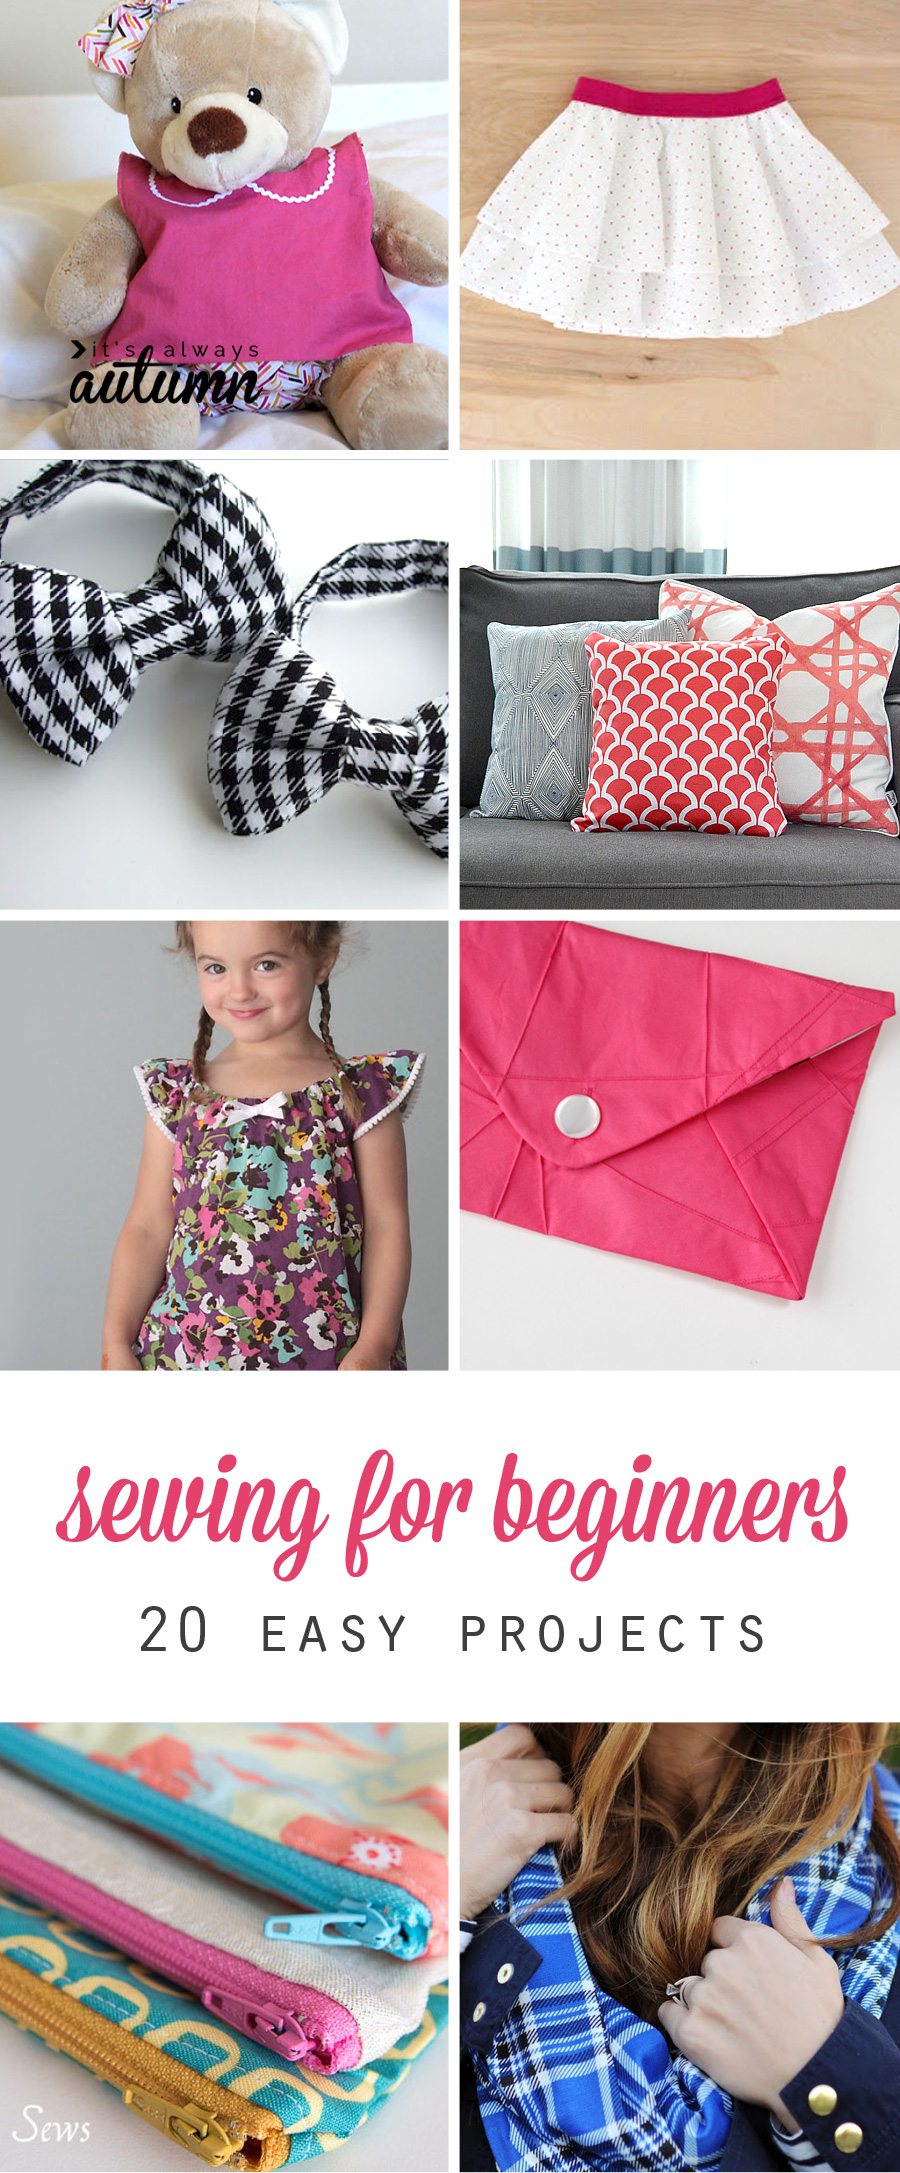 20 easy beginner sewing projects that turn out super cute! - It's Always Autumn